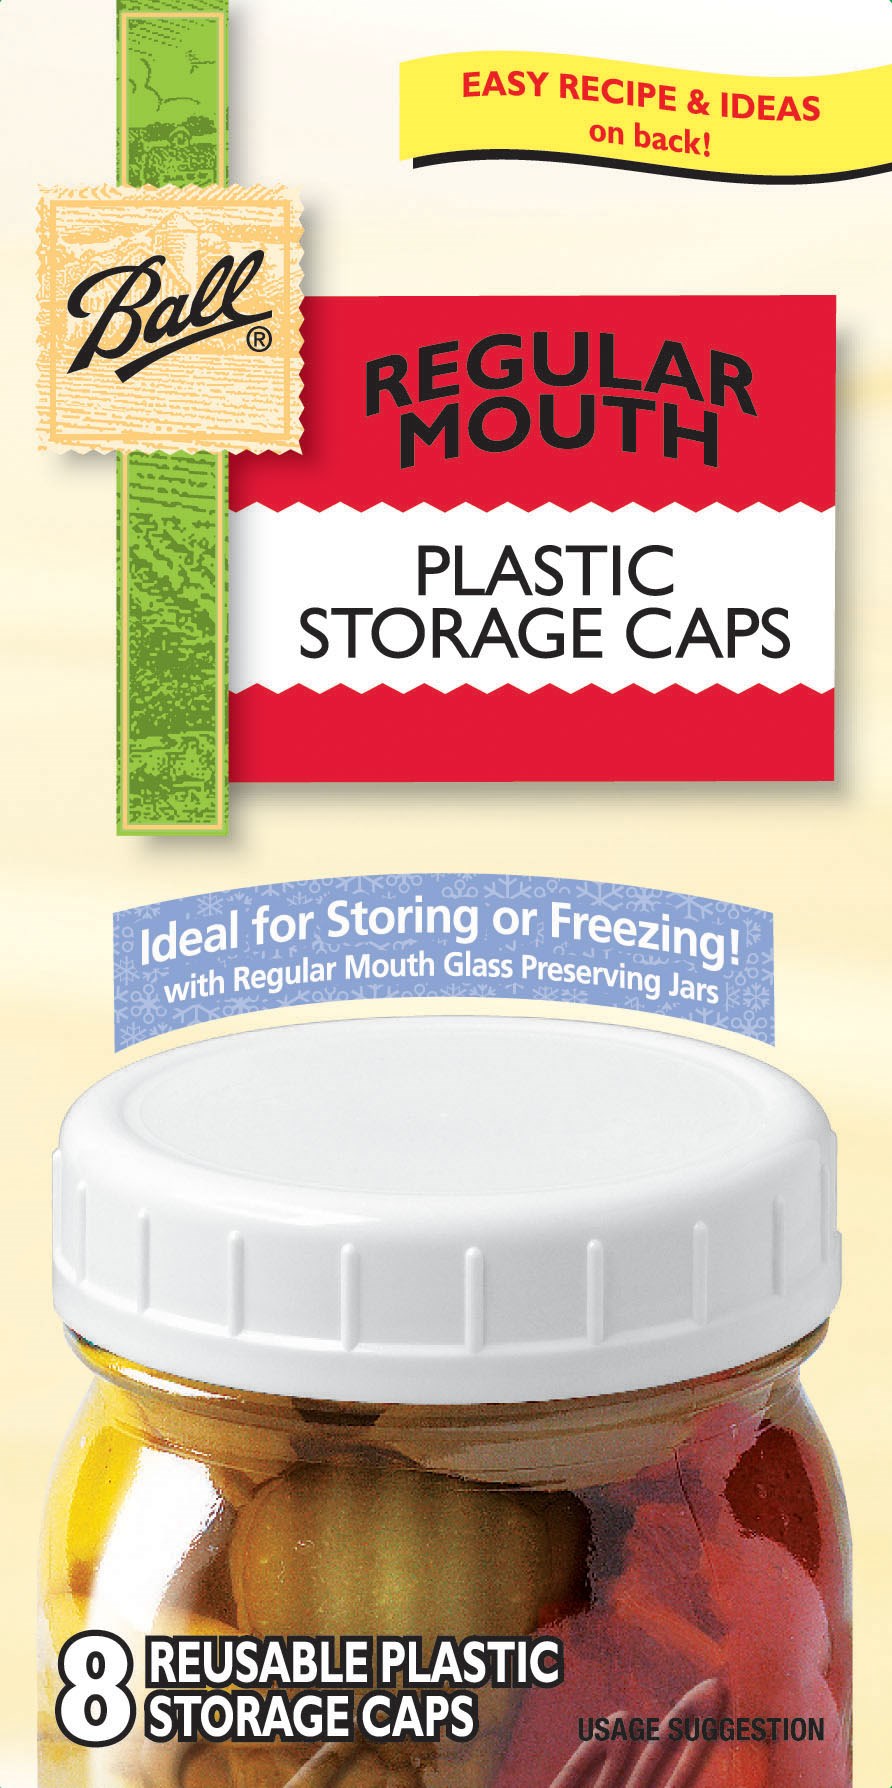 Ball, Ball 36010 Regular Mouth Plastic Storage Caps 8 Count (Pack of 6)